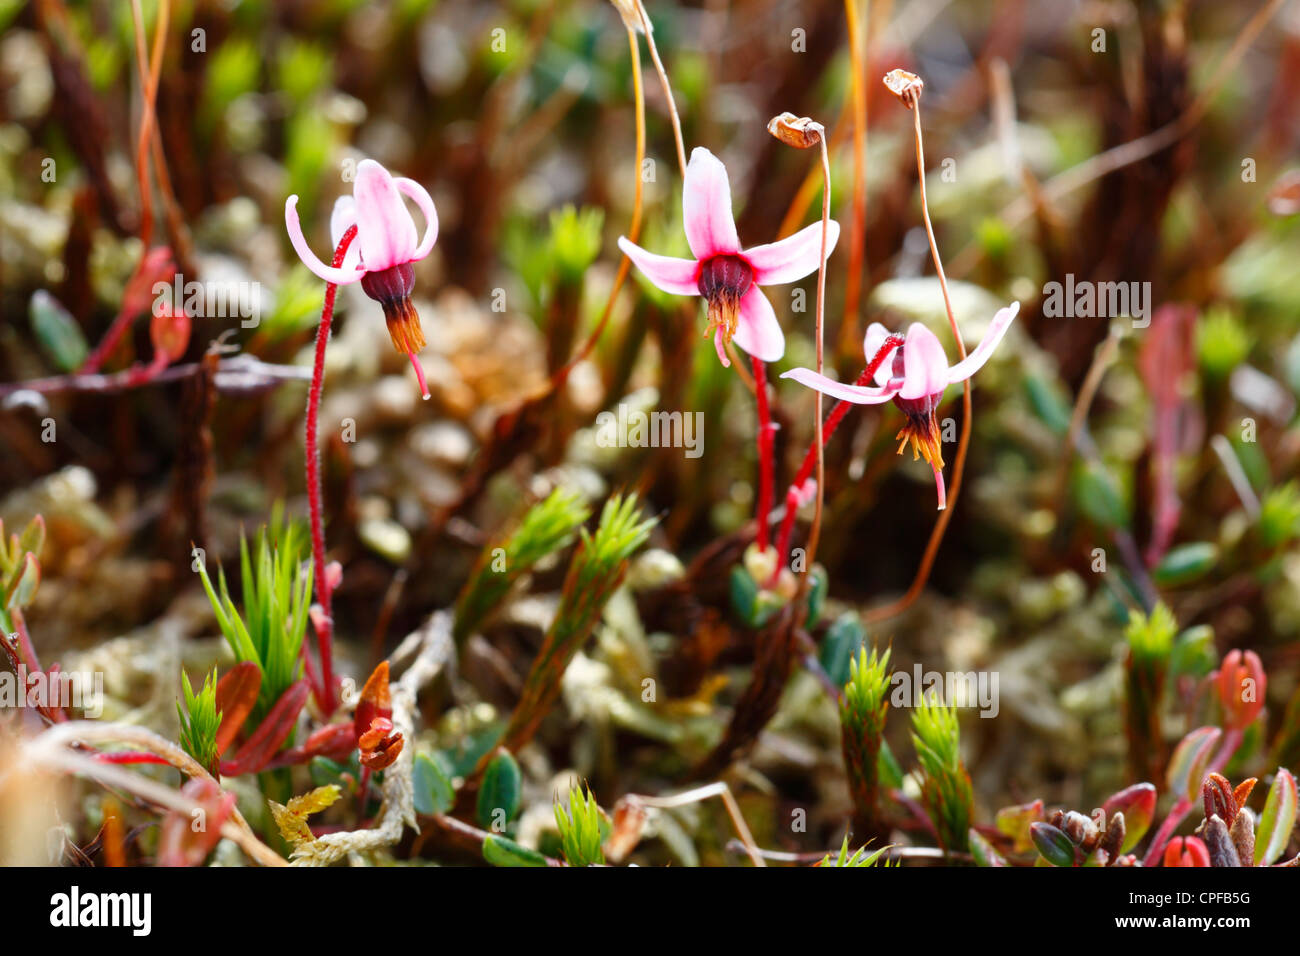 Flowers of Common Cranberry (Vaccinium oxycoccus) in a peat bog. Ceredigion, Wales. Stock Photo